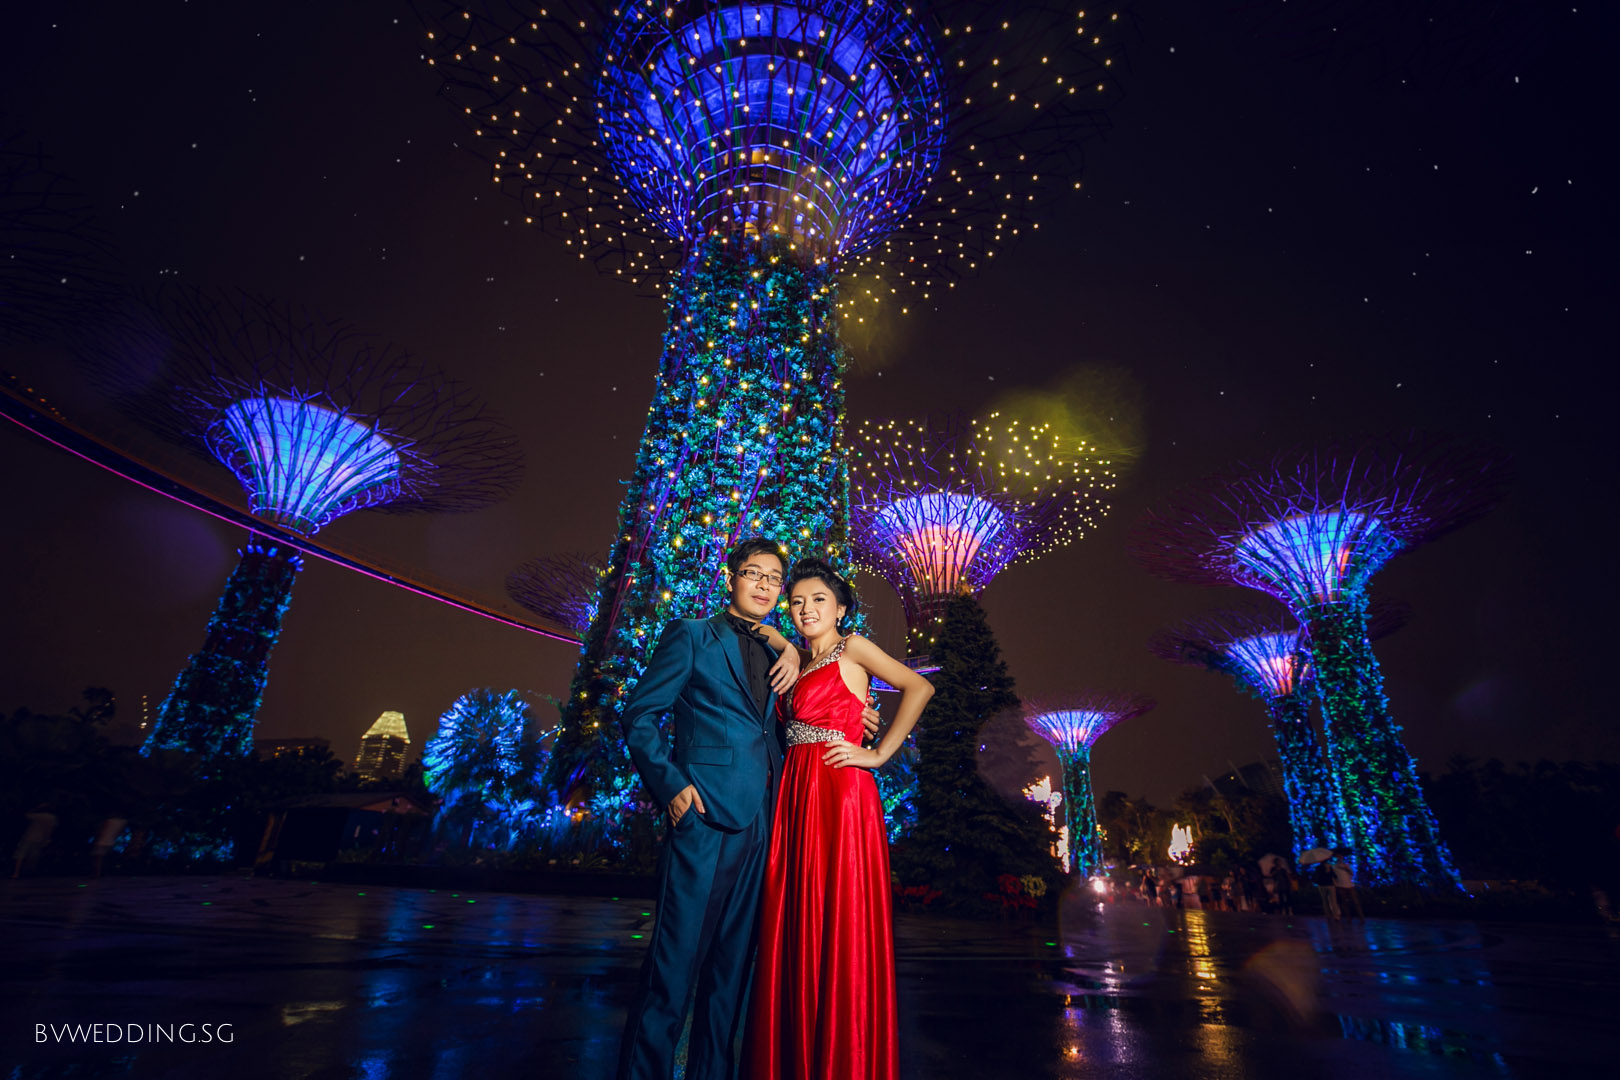 pre-wedding Photoshoot at Gardens By the Bay